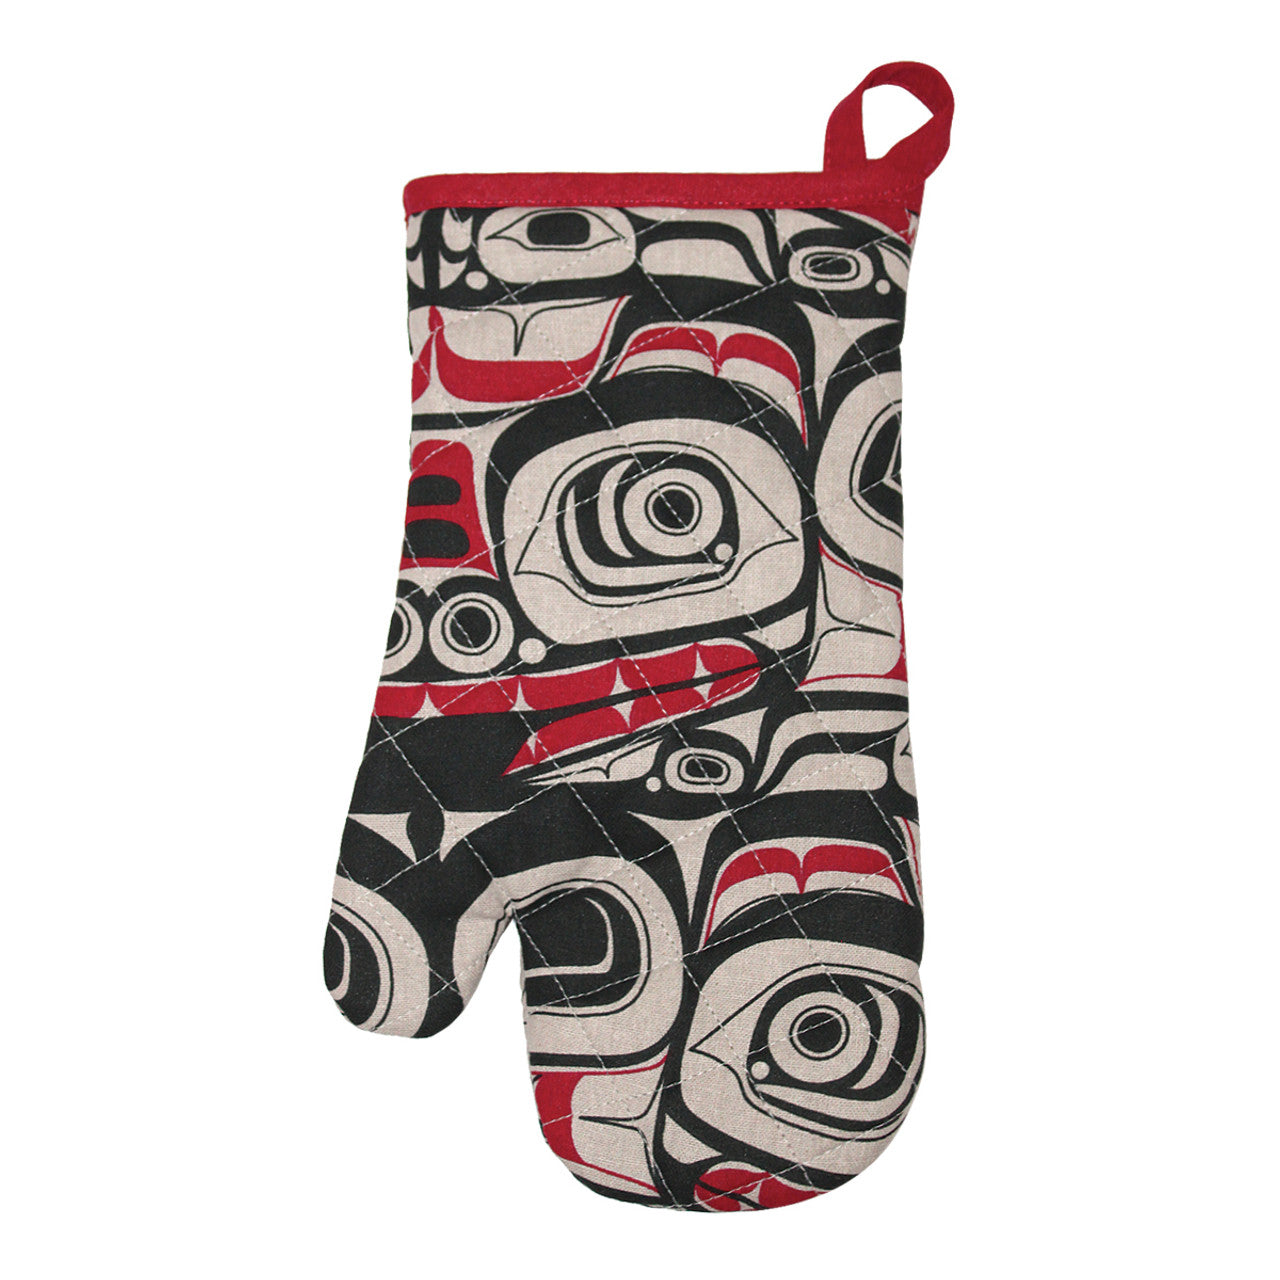 COTTON OVEN MITTS - Matriarch Bear - K105 - House of Himwitsa Native Art Gallery and Gifts